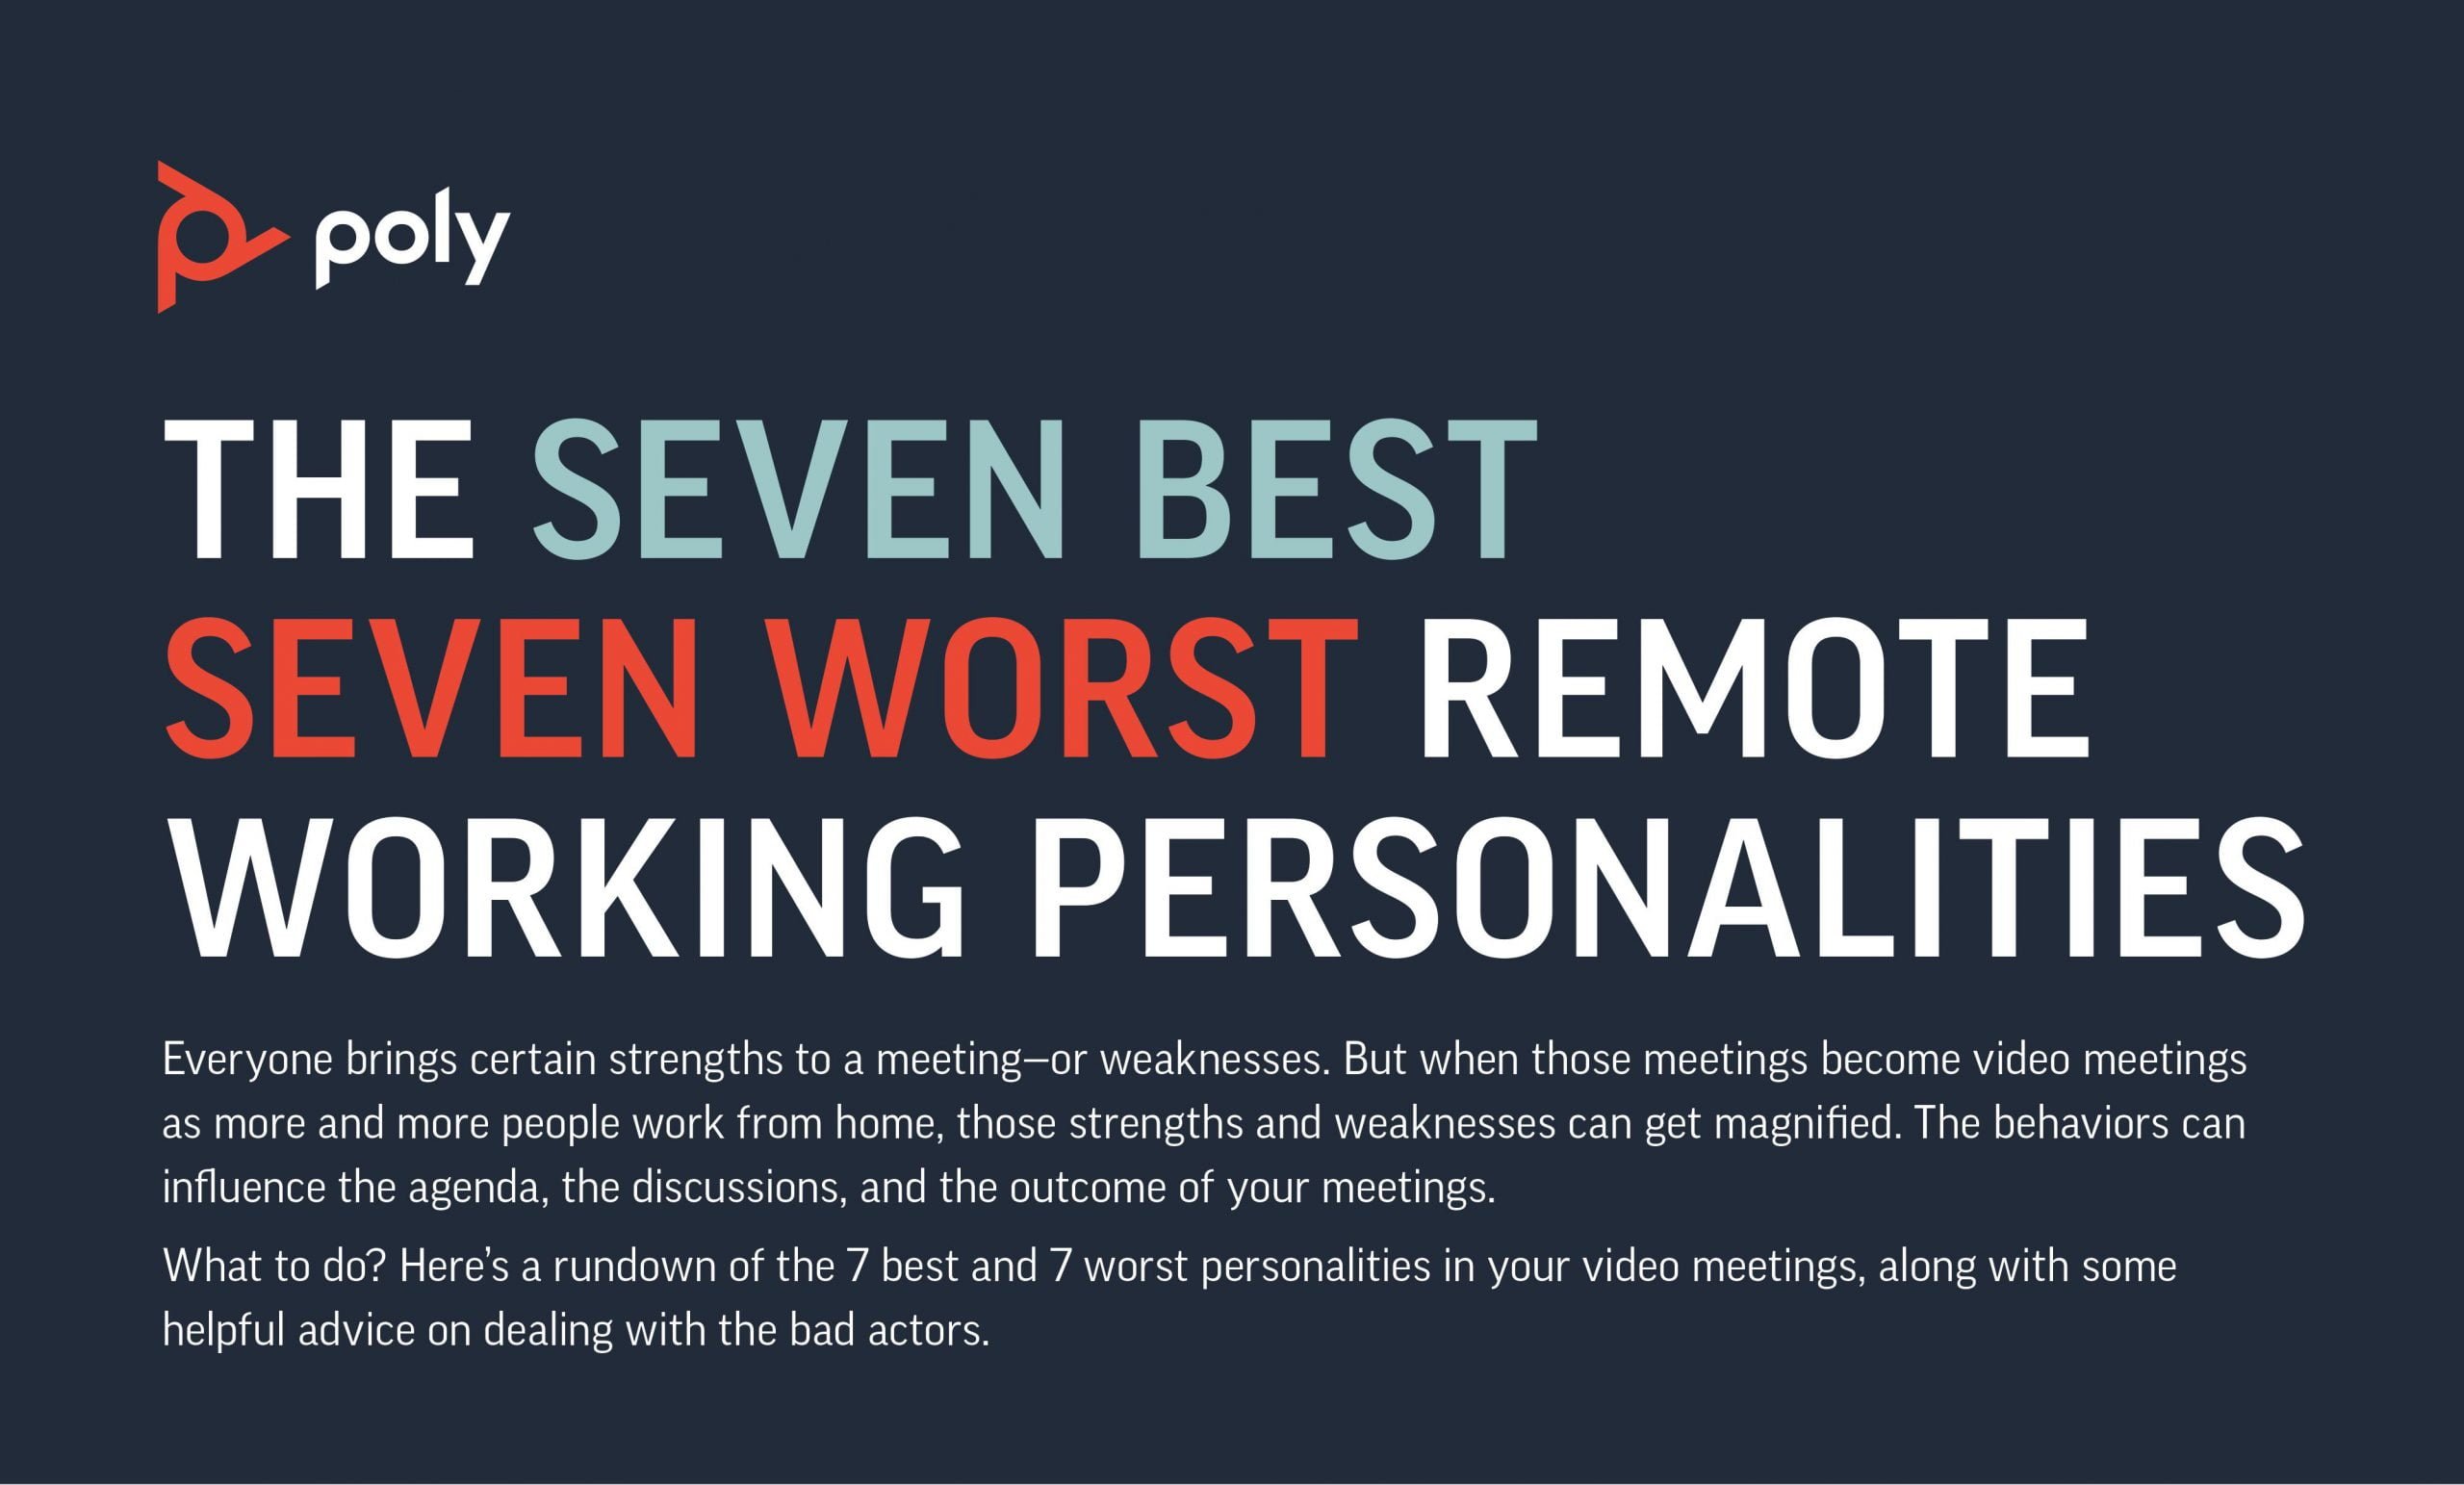 The 7 best and 7 worst remote working personalities